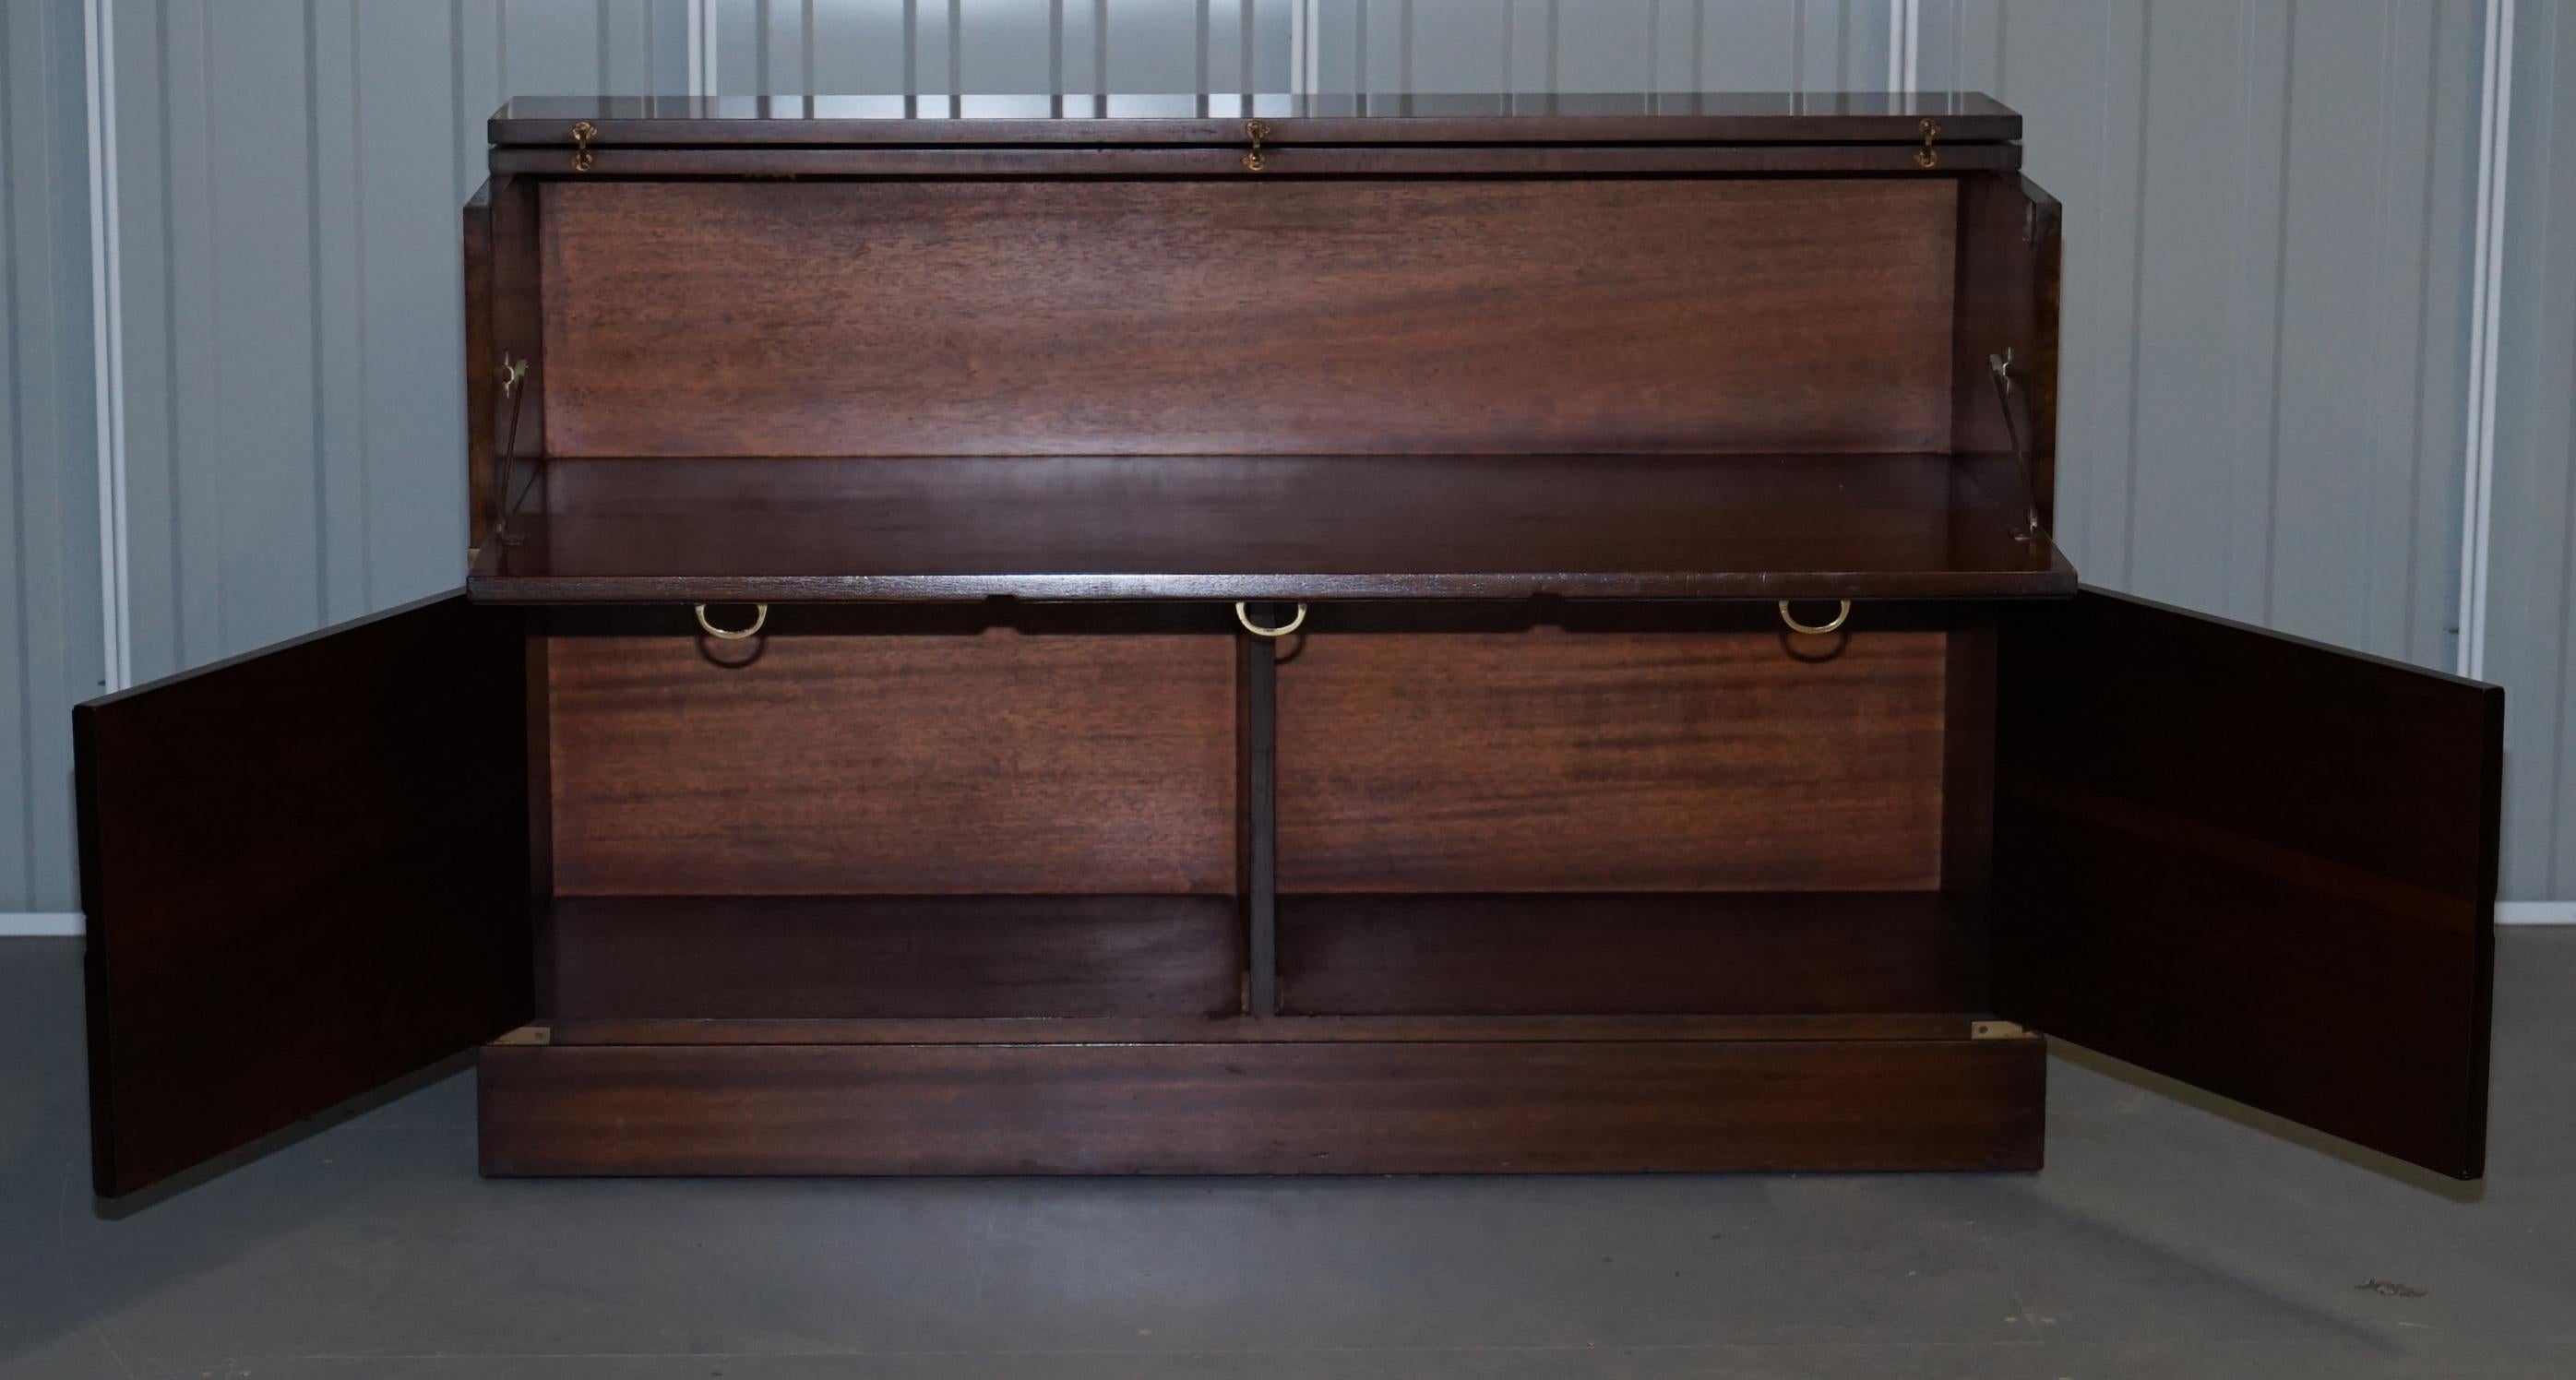 Hand-Crafted RECORD PLAYER CABINET HIDDEN INSIDE MILITARY CAMPAIGN CHEST CHEST OF DRAWERs